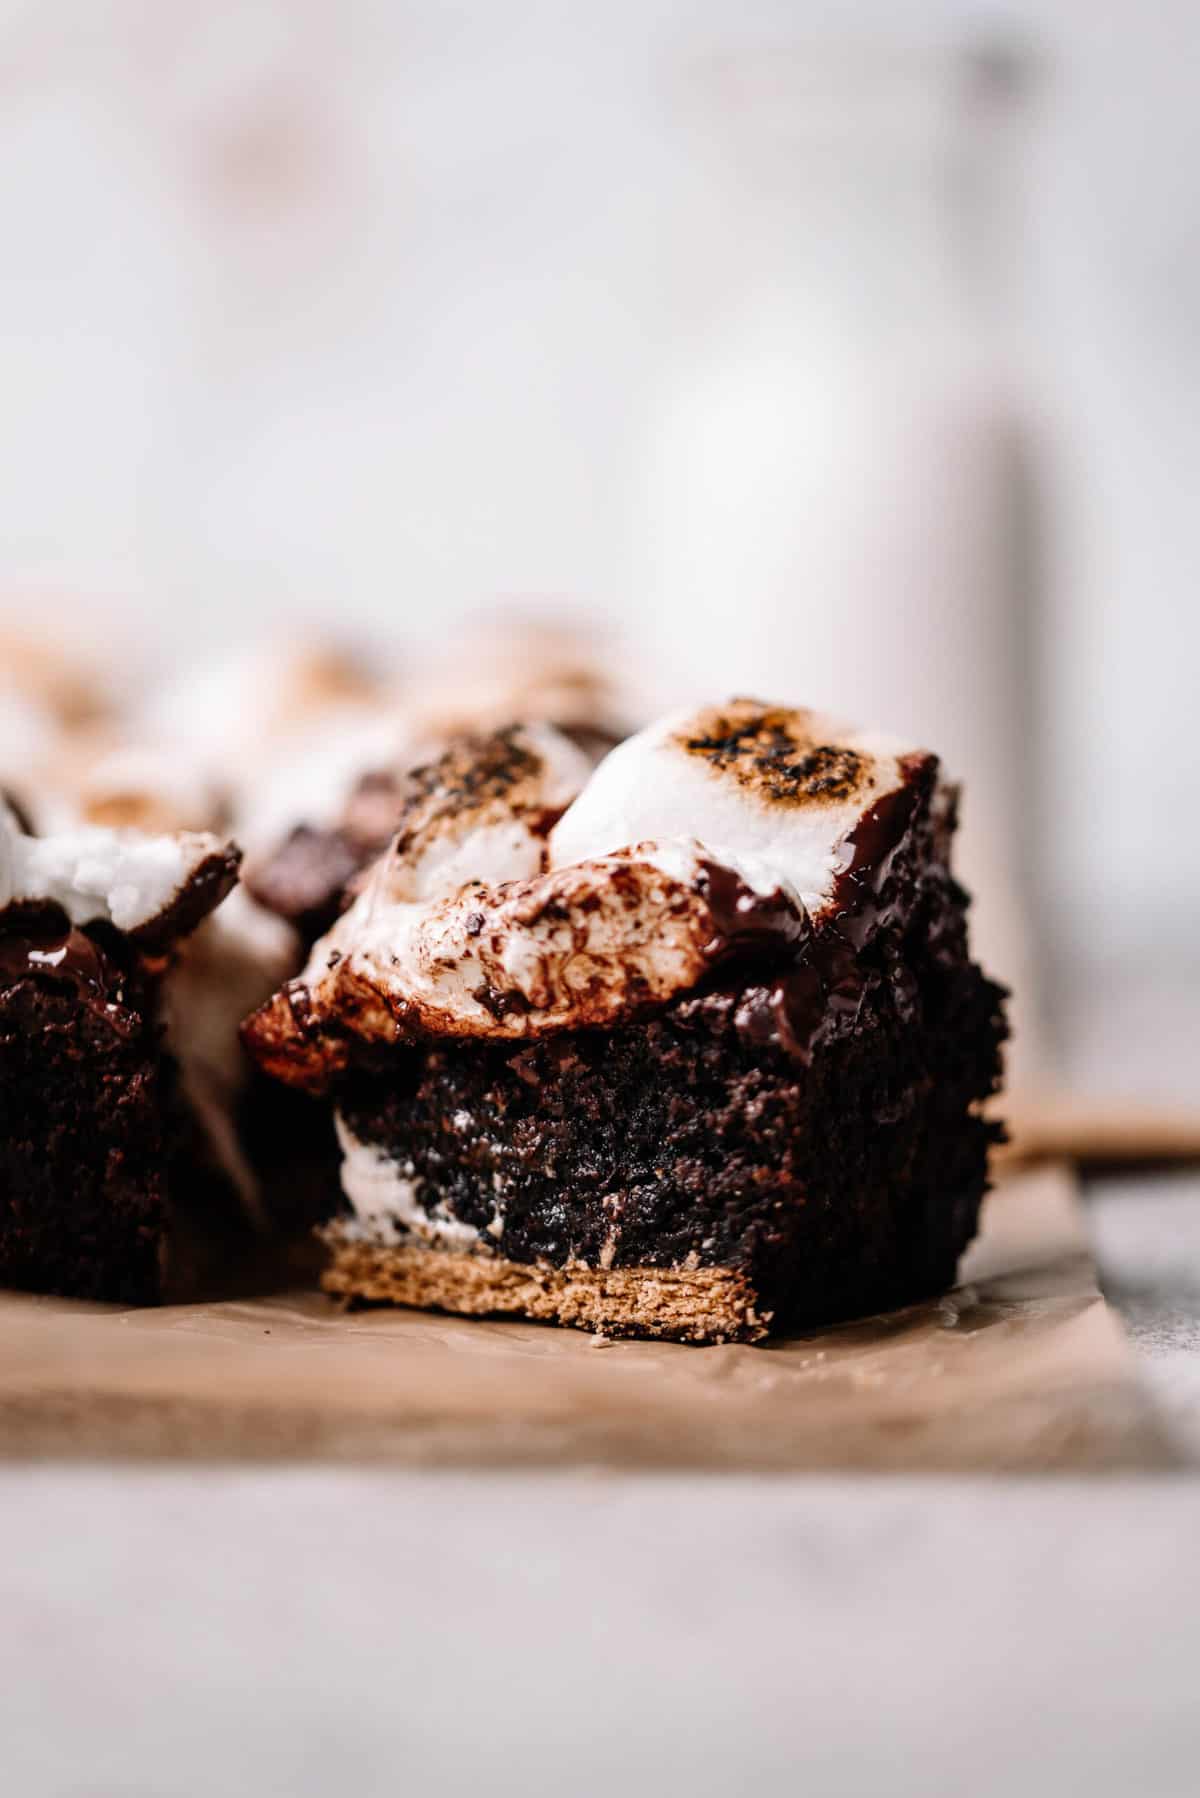 A s'mores brownie on parchment paper.